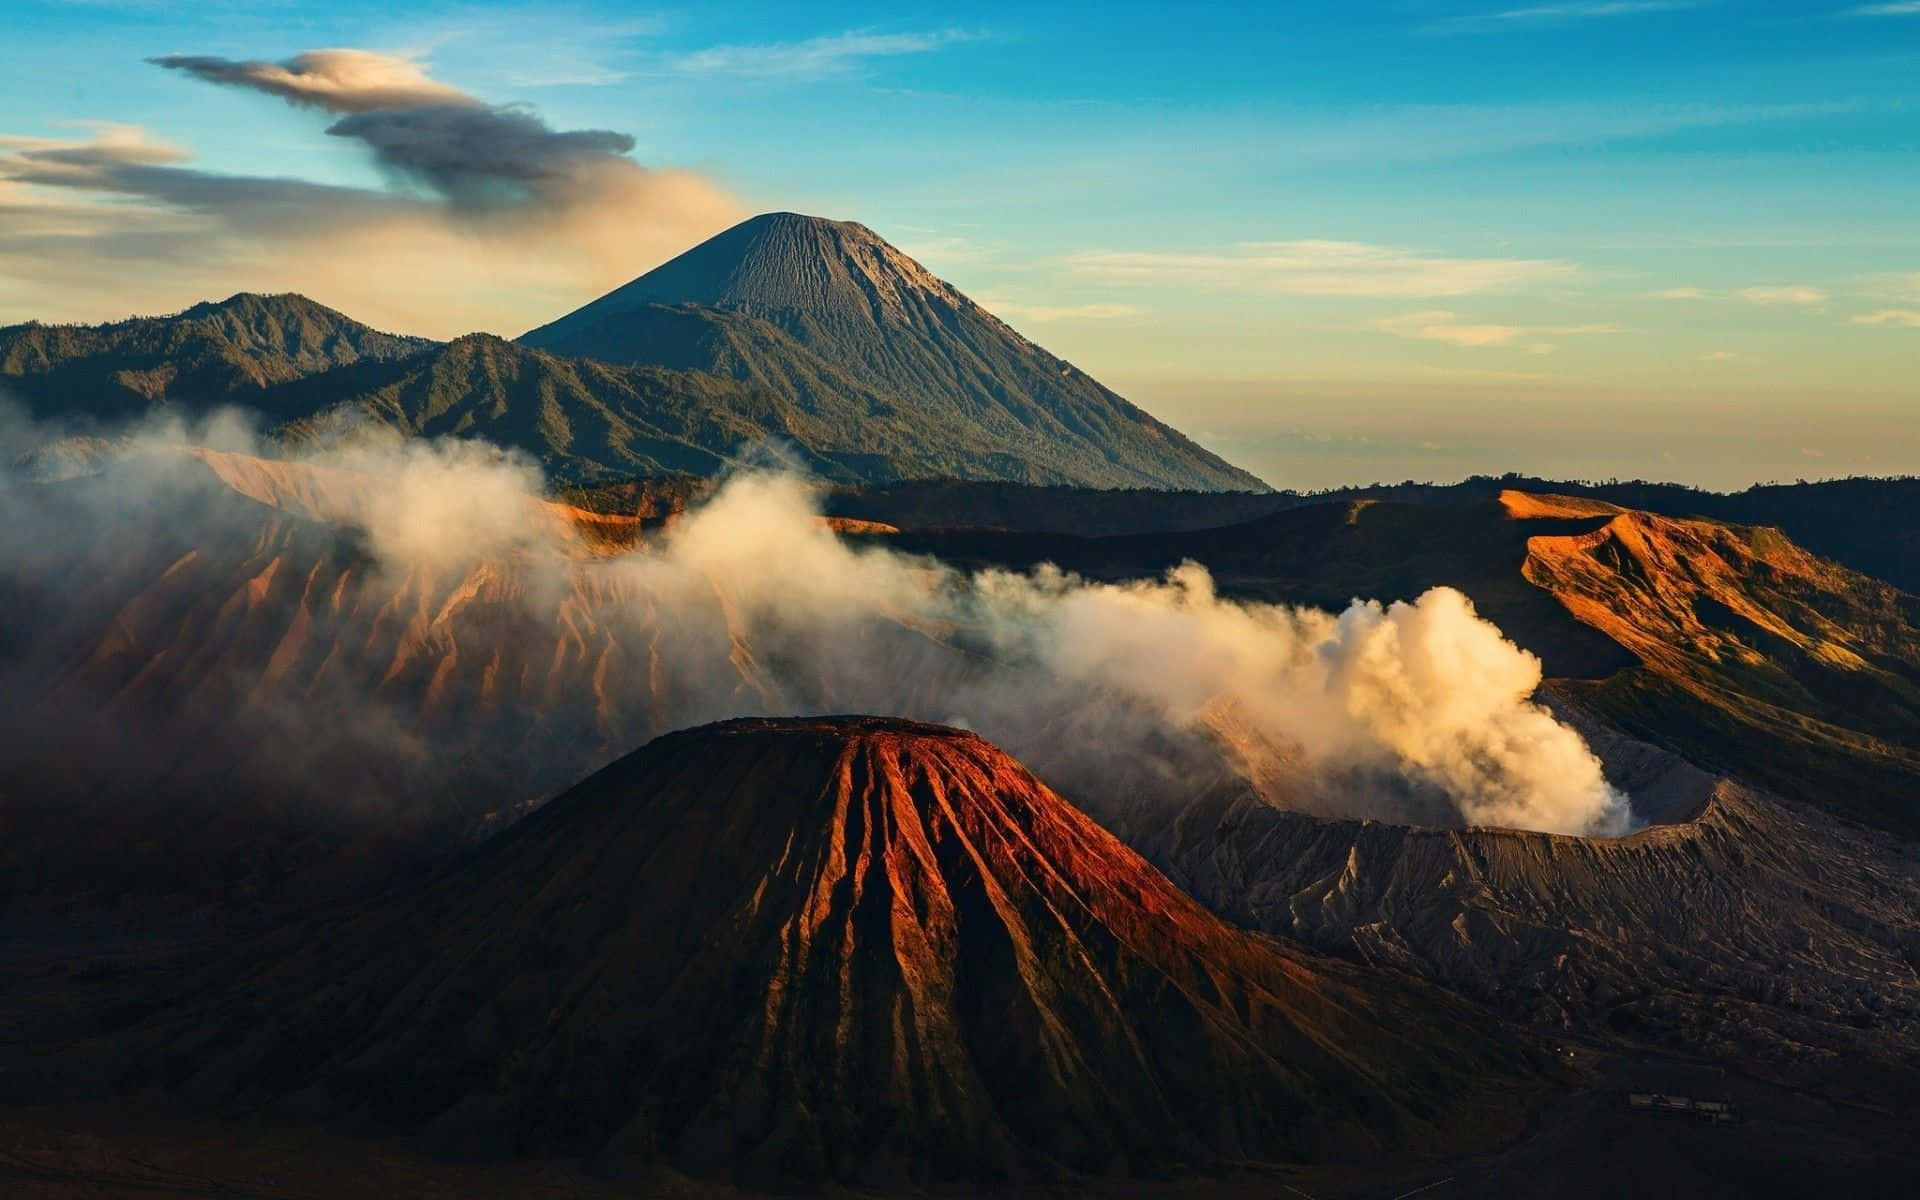 Explore the towering volcanoes and beautiful beaches of Indonesia